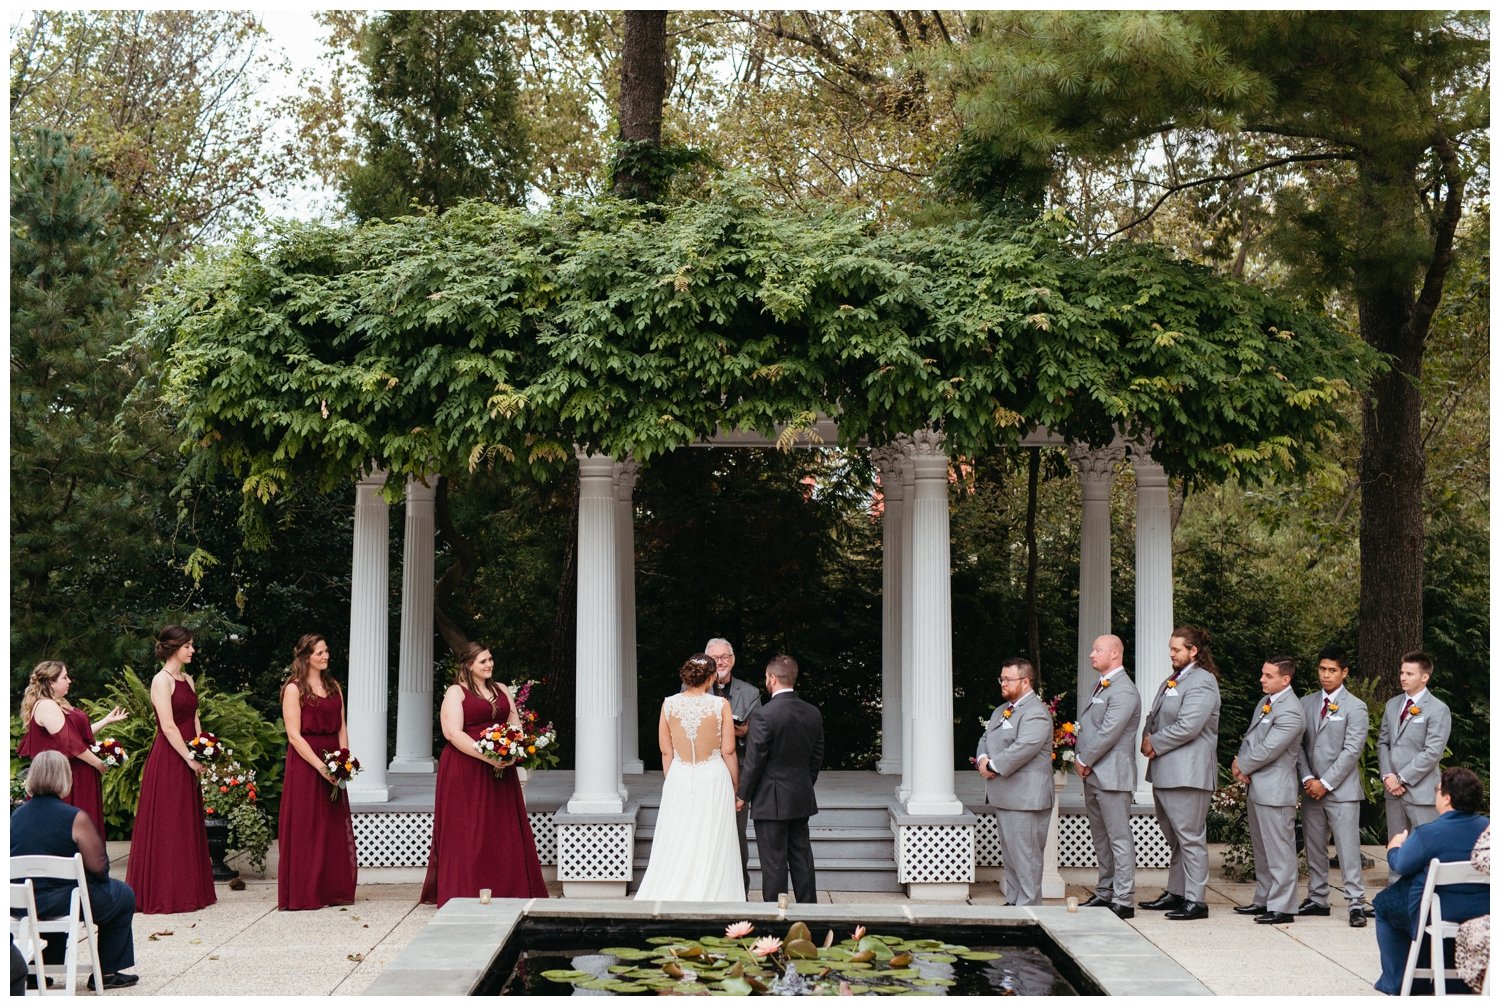 The couple faces the officiant during the intimate destination wedding ceremony